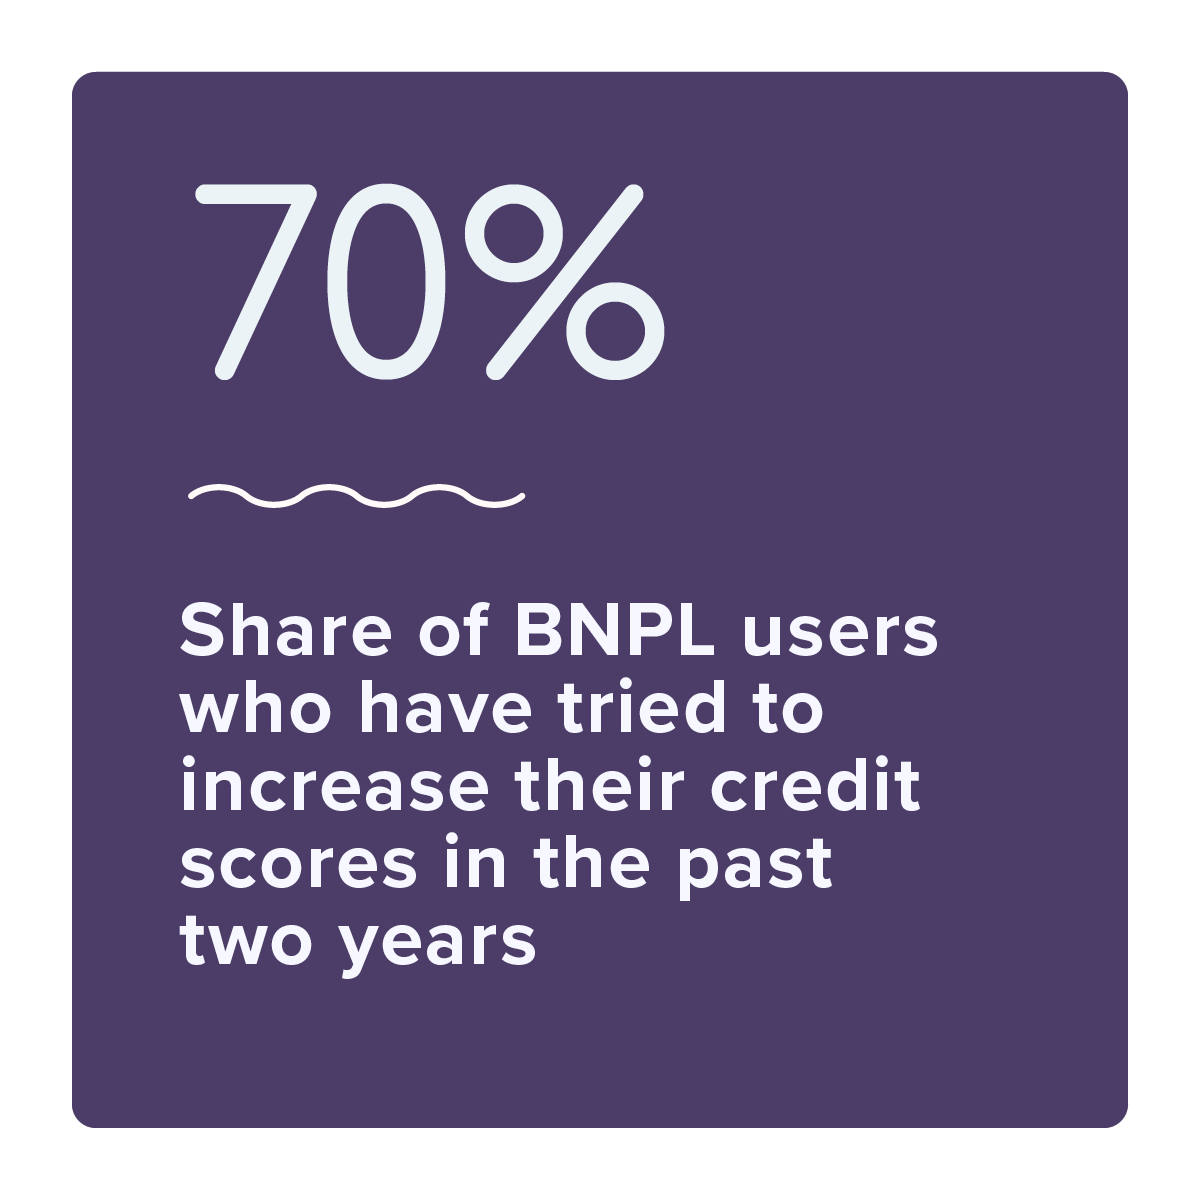 70%: Share of BNPL users who have tried to increase their credit scores in the past two years